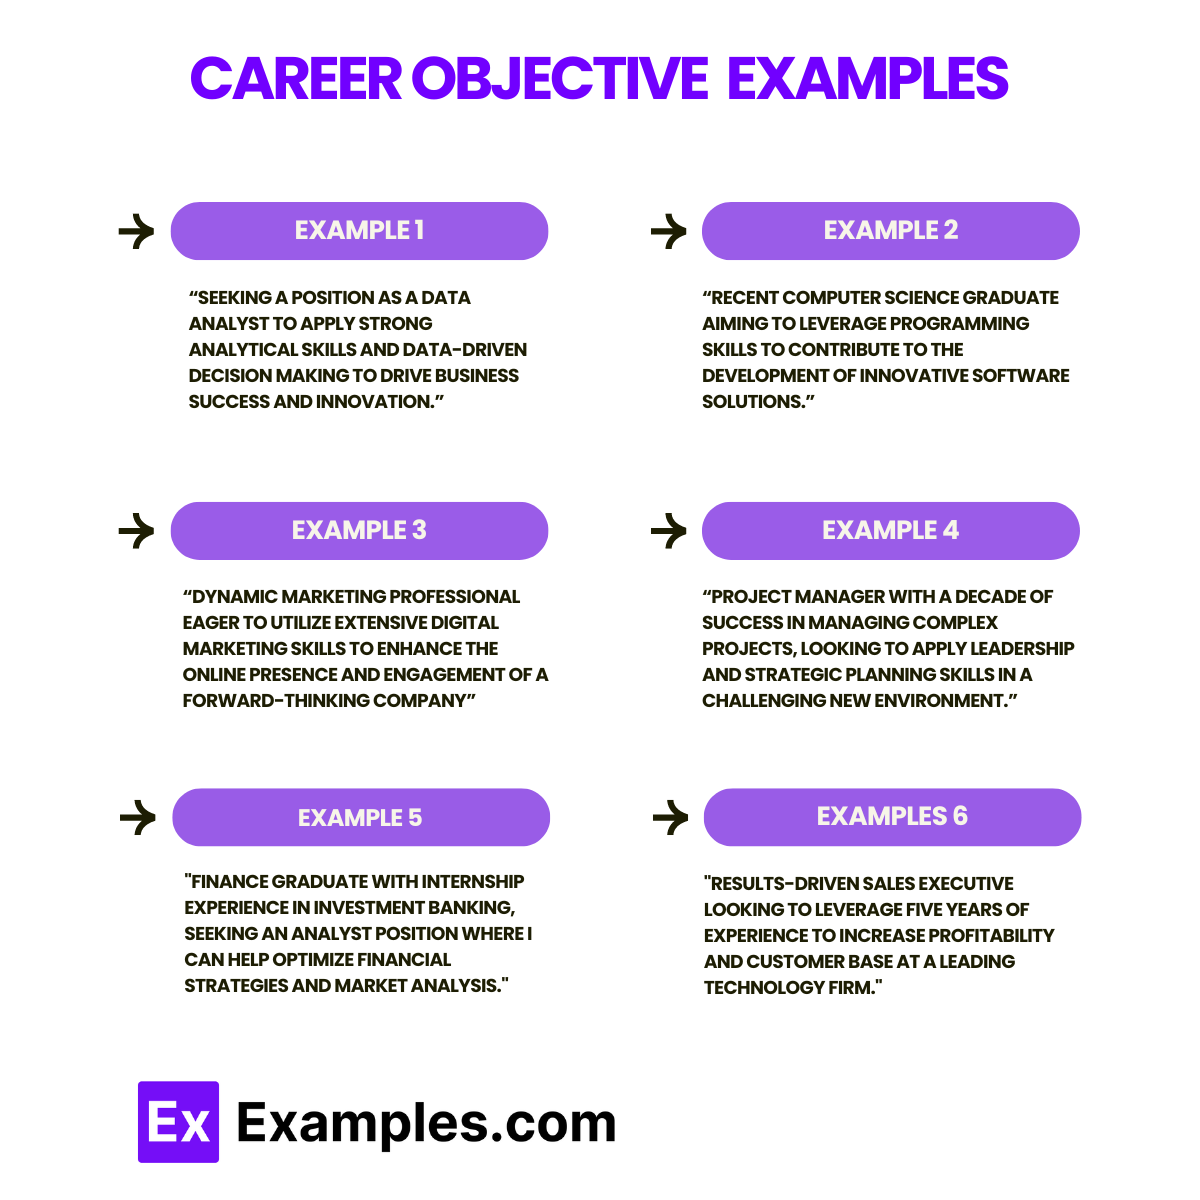 Career Objective Examples